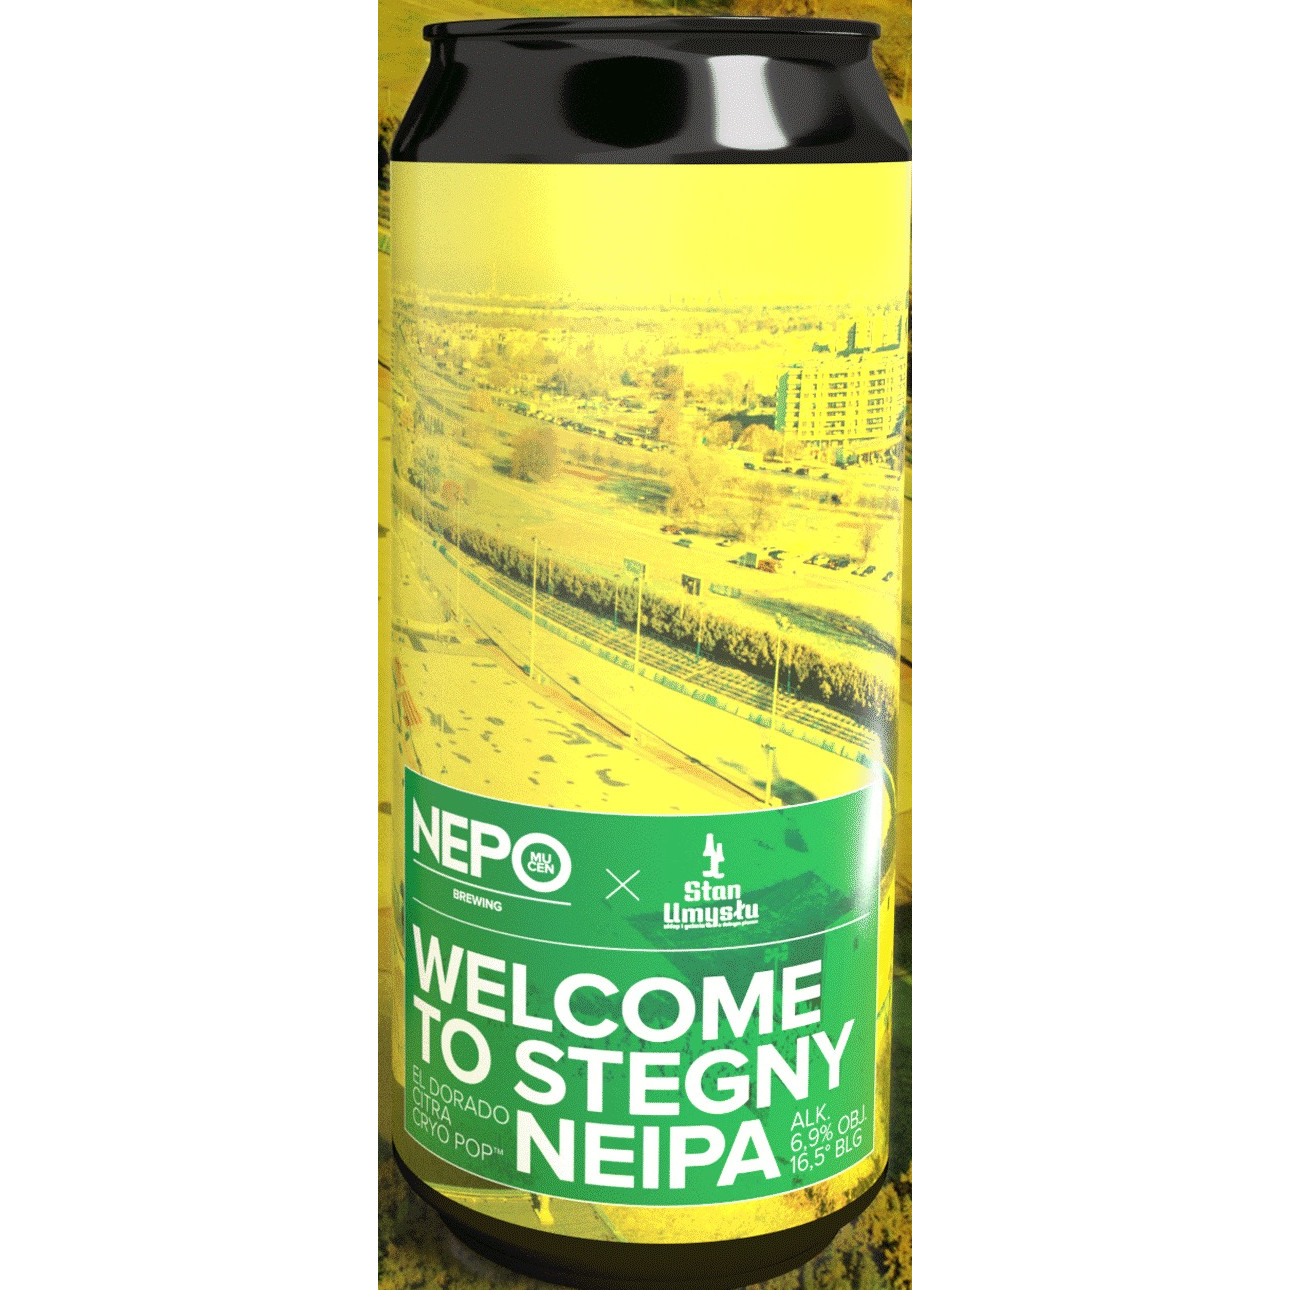 Nepomucen WELCOME TO STEGNY – New England IPA